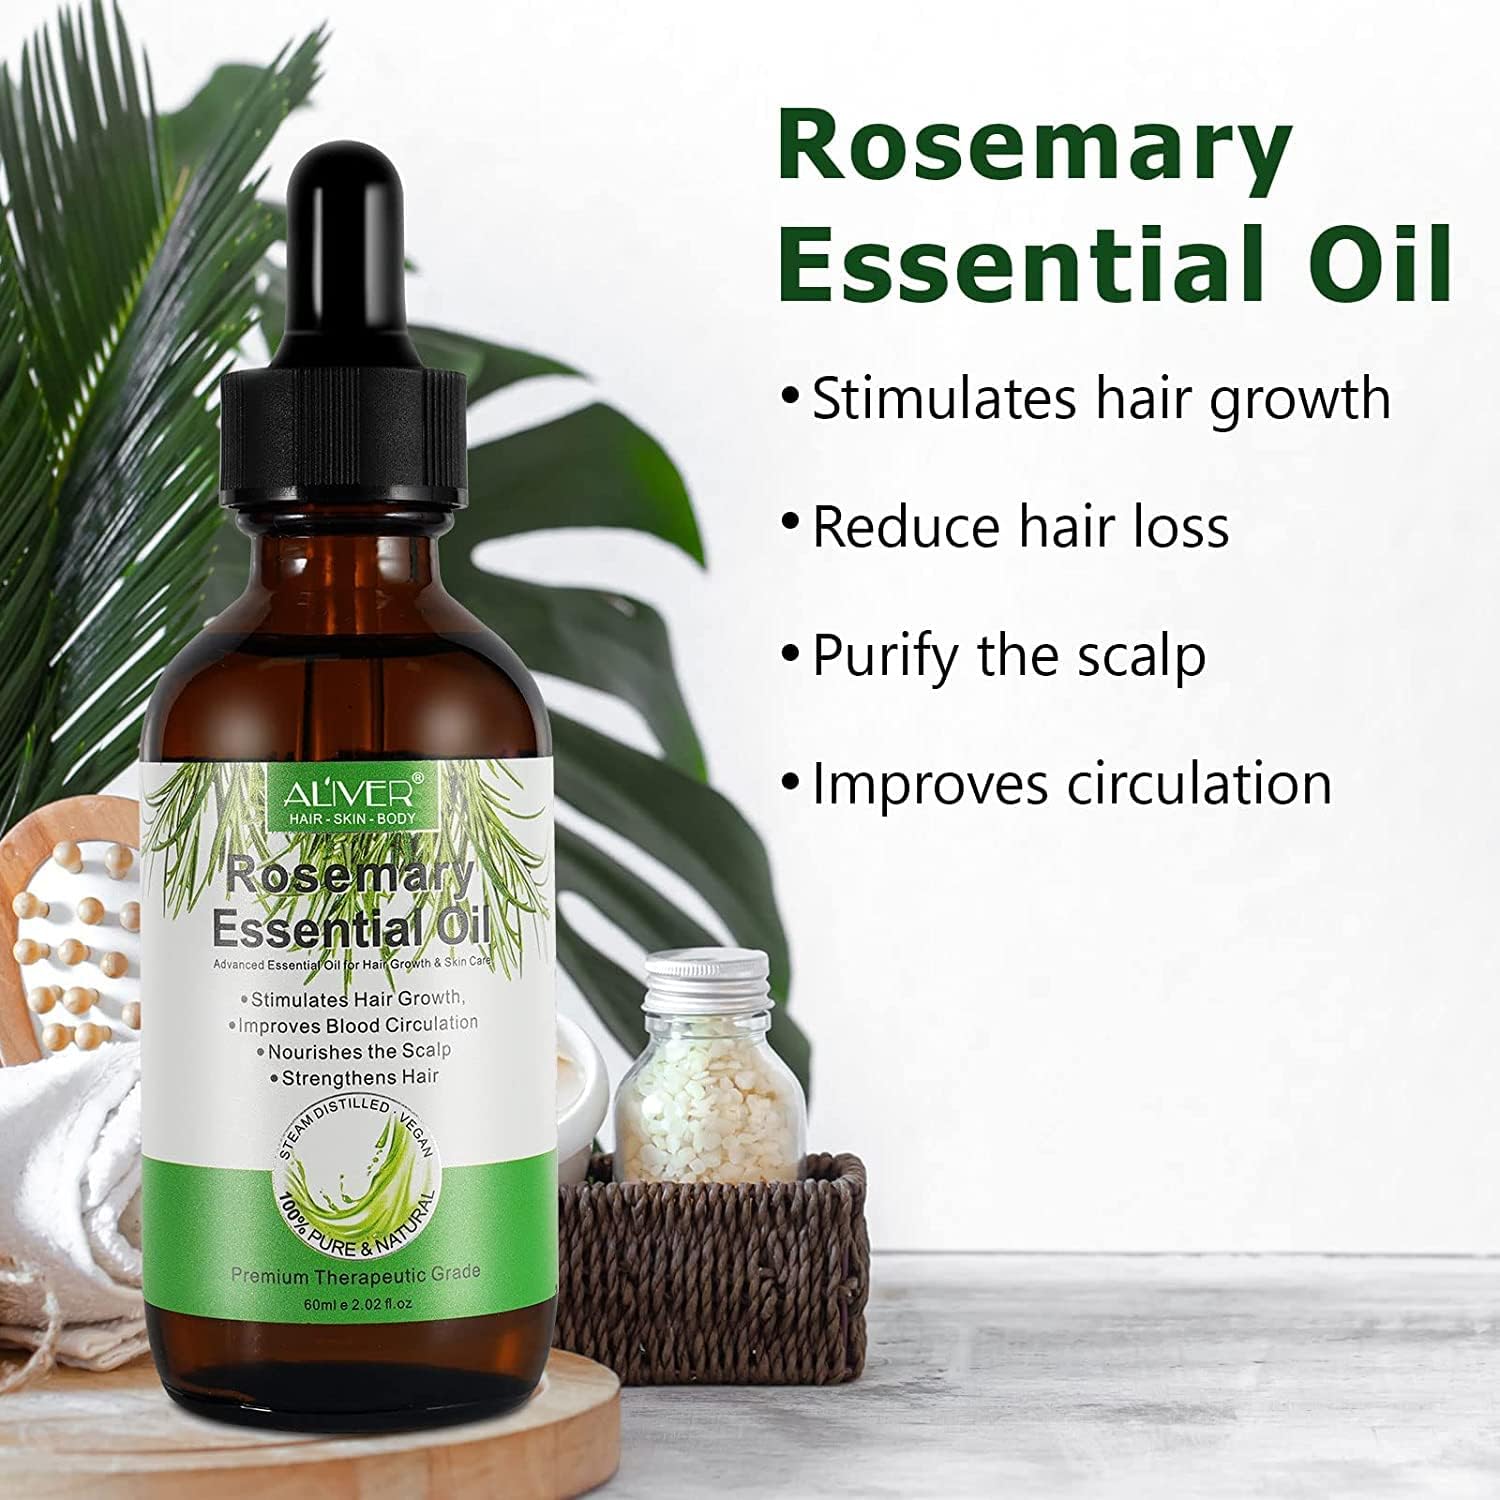 ALIVER (2 Pack) Rosemary Essential Oil, Rosemary Oil for Hair Growth, Therapeutic Grade Organic Rosemary Oil for Scalp Massager Hair Growth